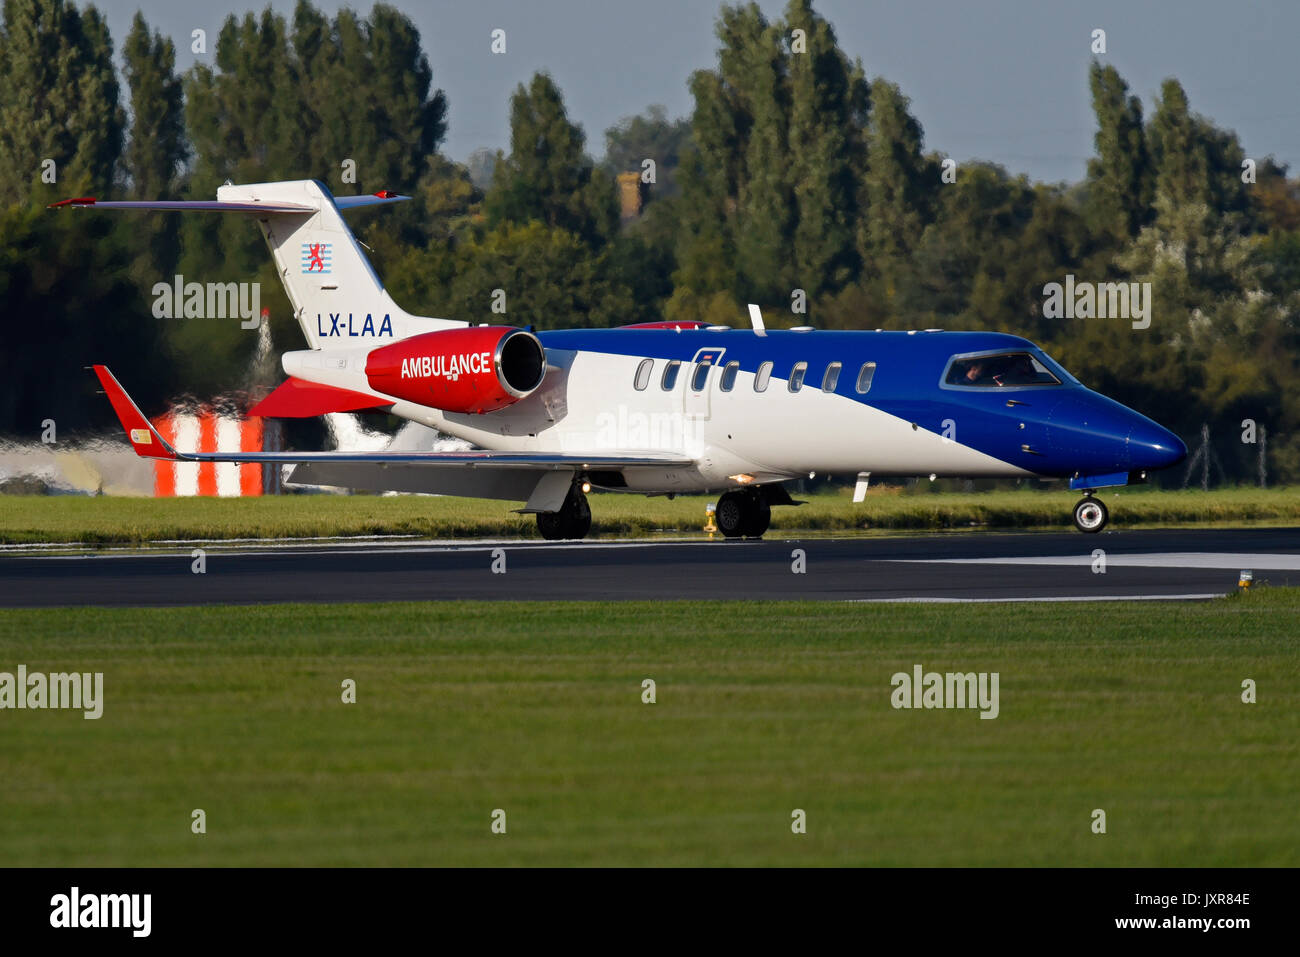 Learjet 45XR jet plane LX-LAA air ambulance of European Air Ambulance EAA one of the largest specialised air ambulance service providers in Europe. Stock Photo